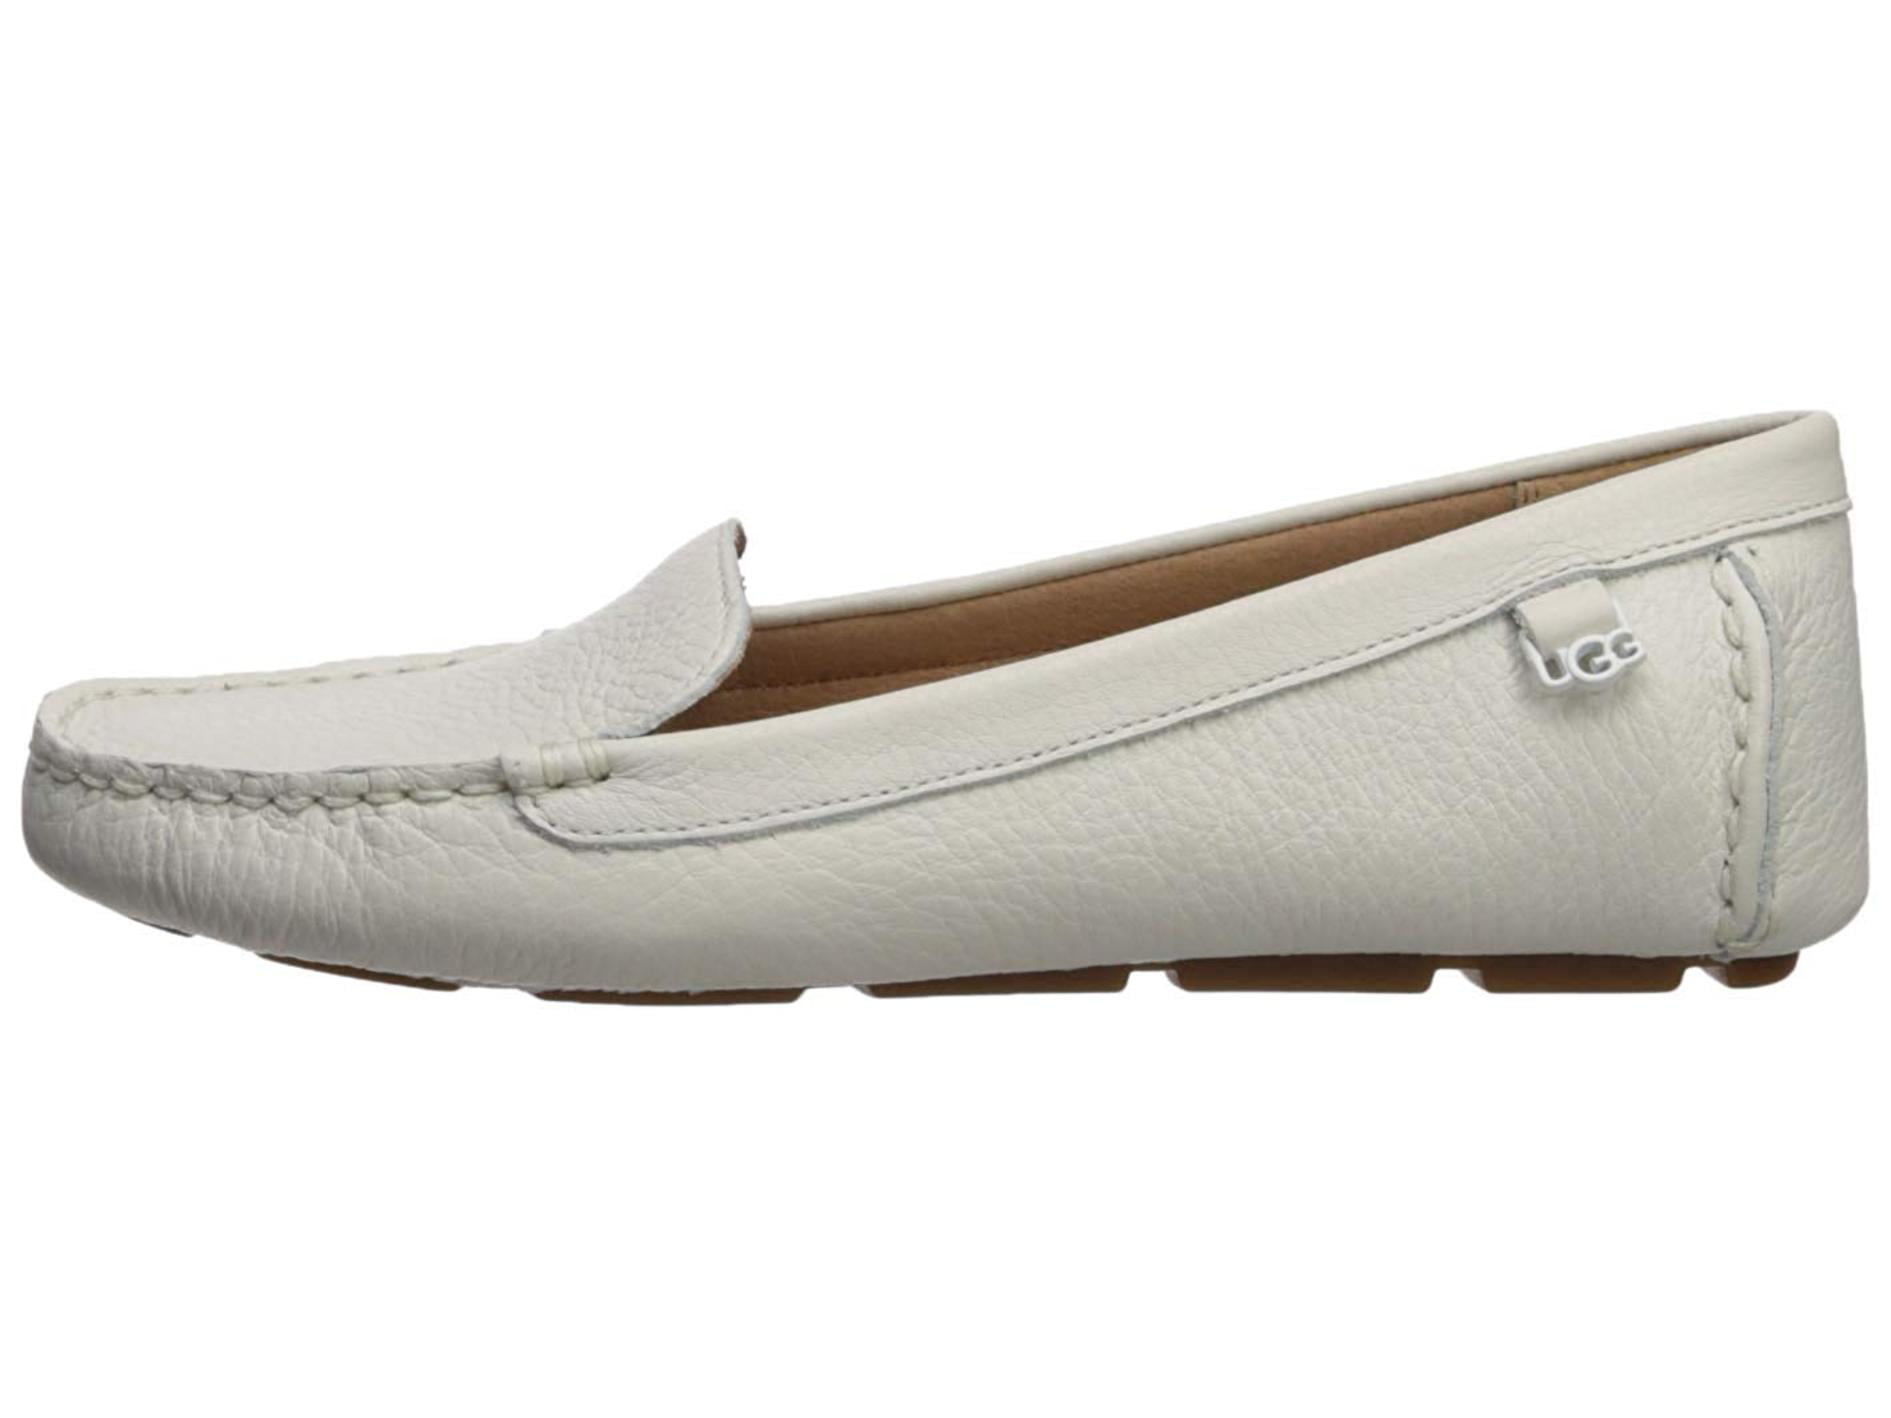 UGG Women's Flores Driving Style Loafer 